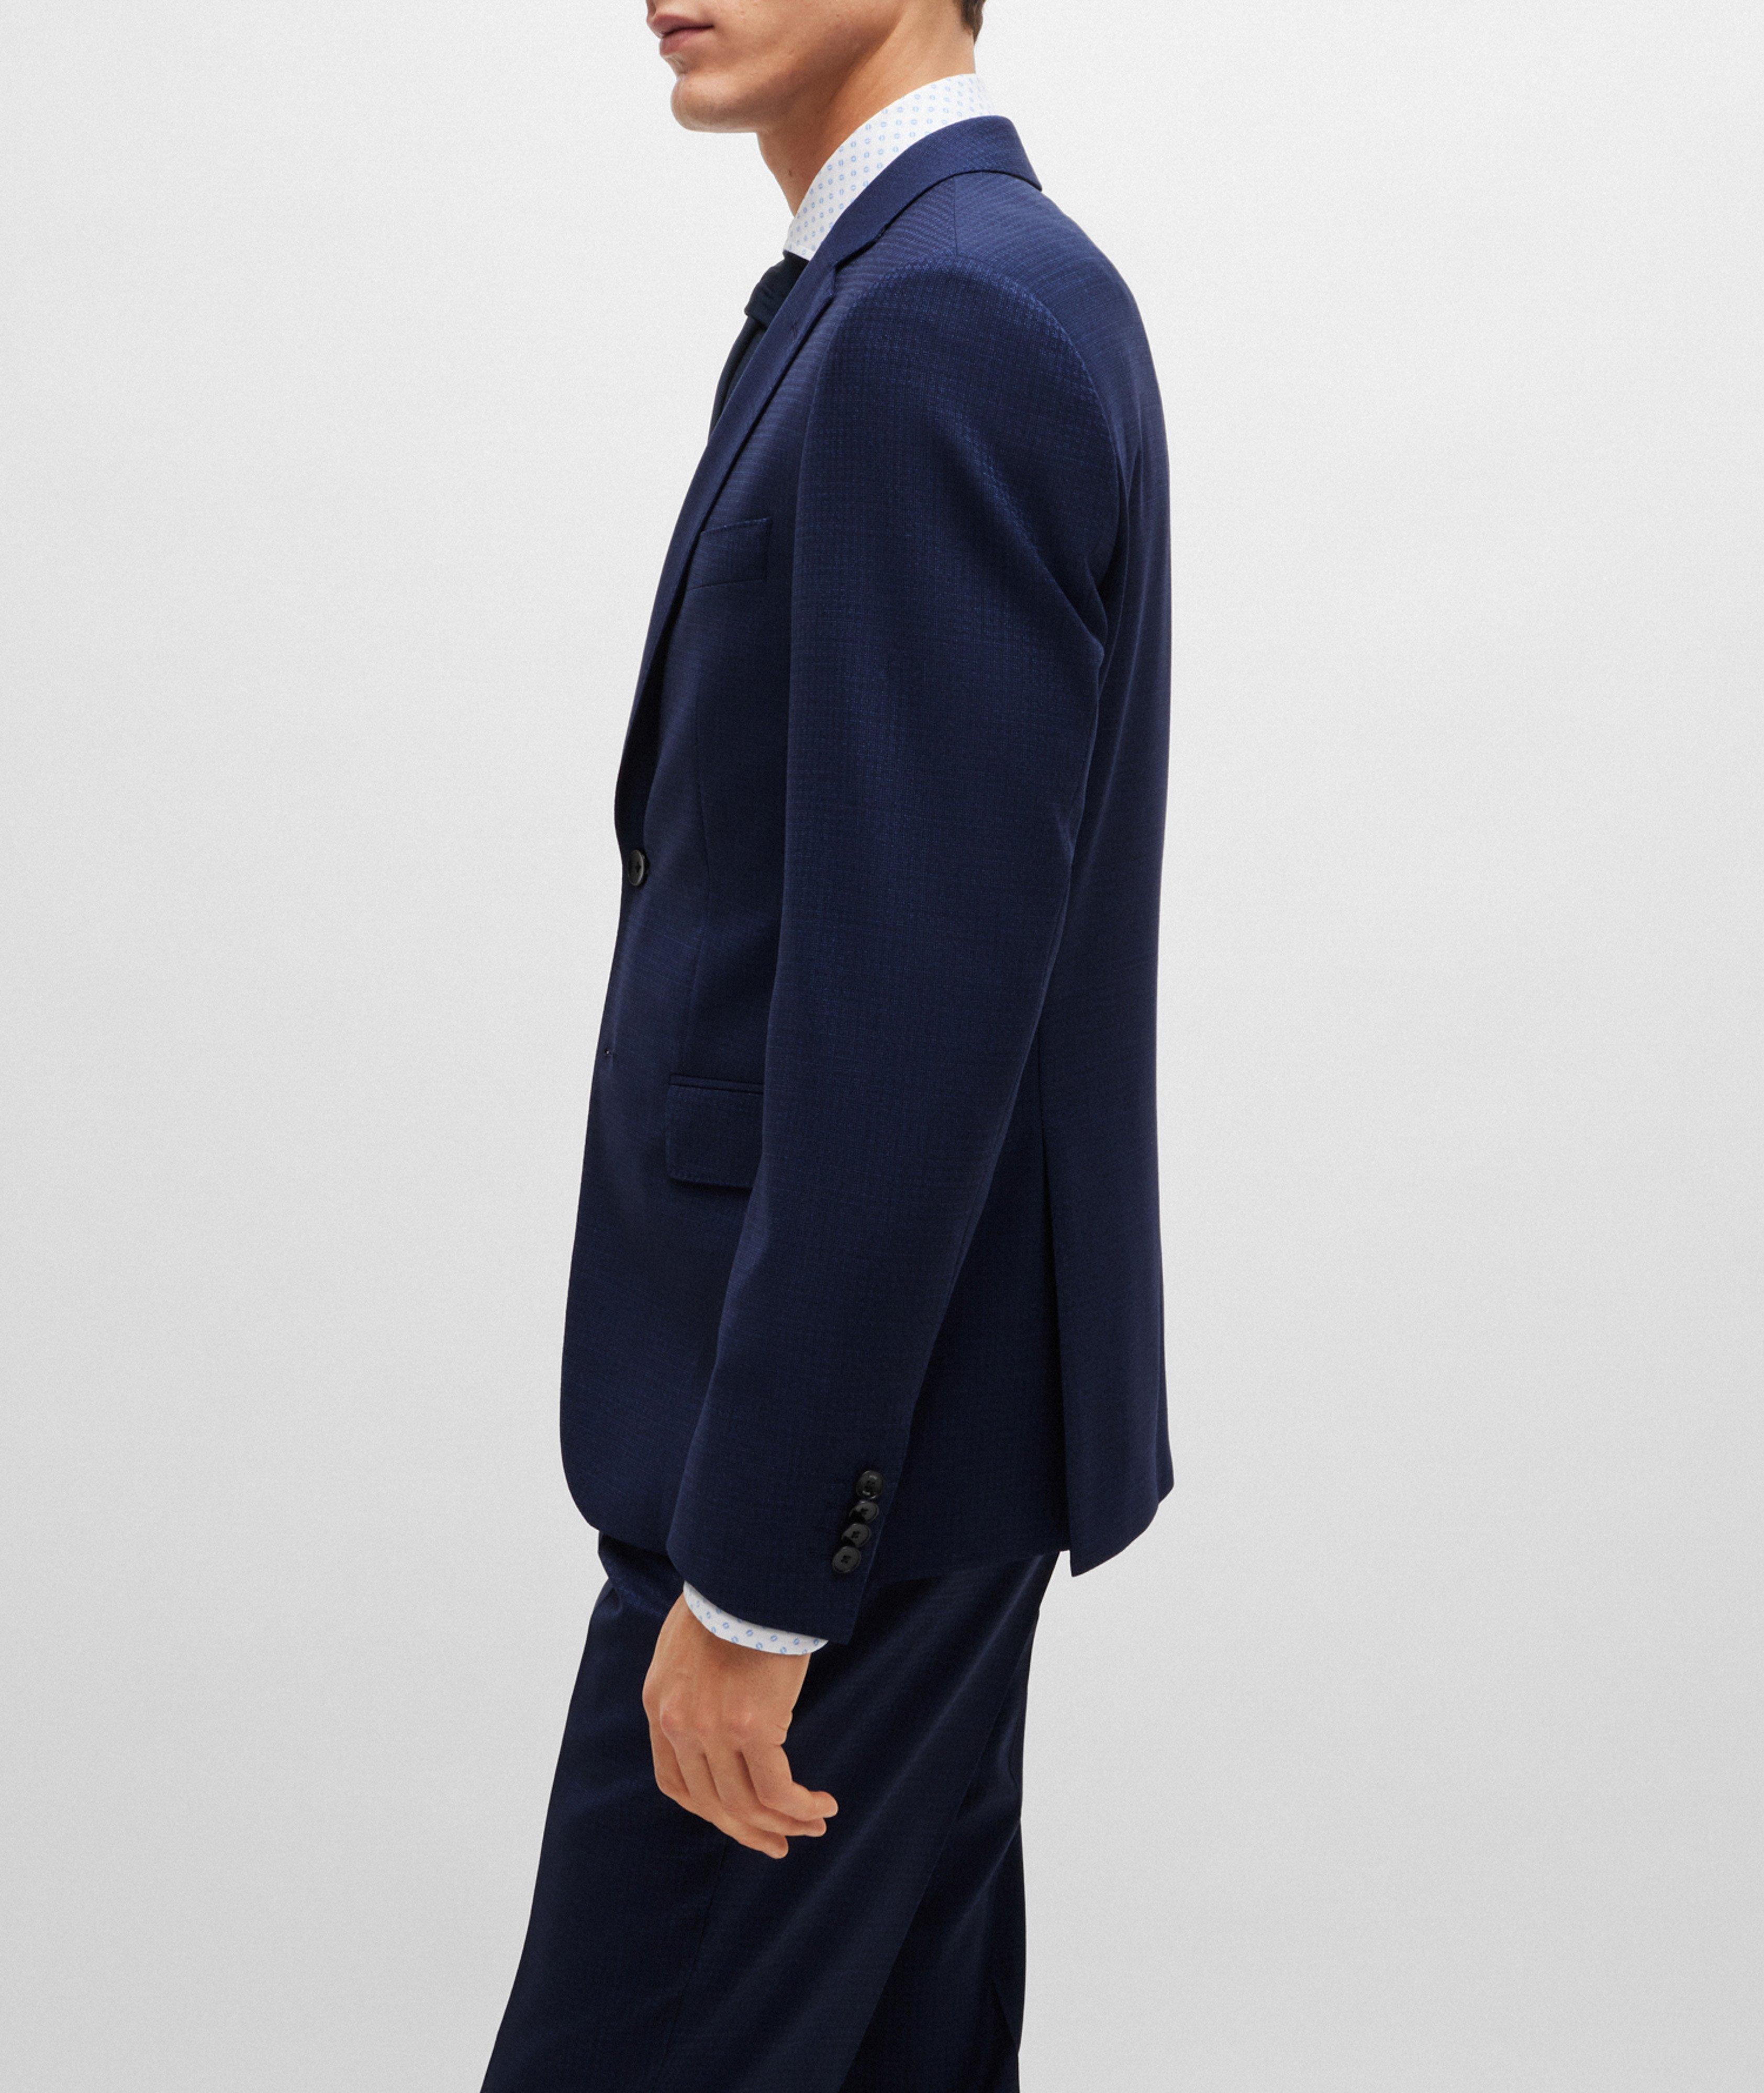 Checked Slim-Fit Suit image 4